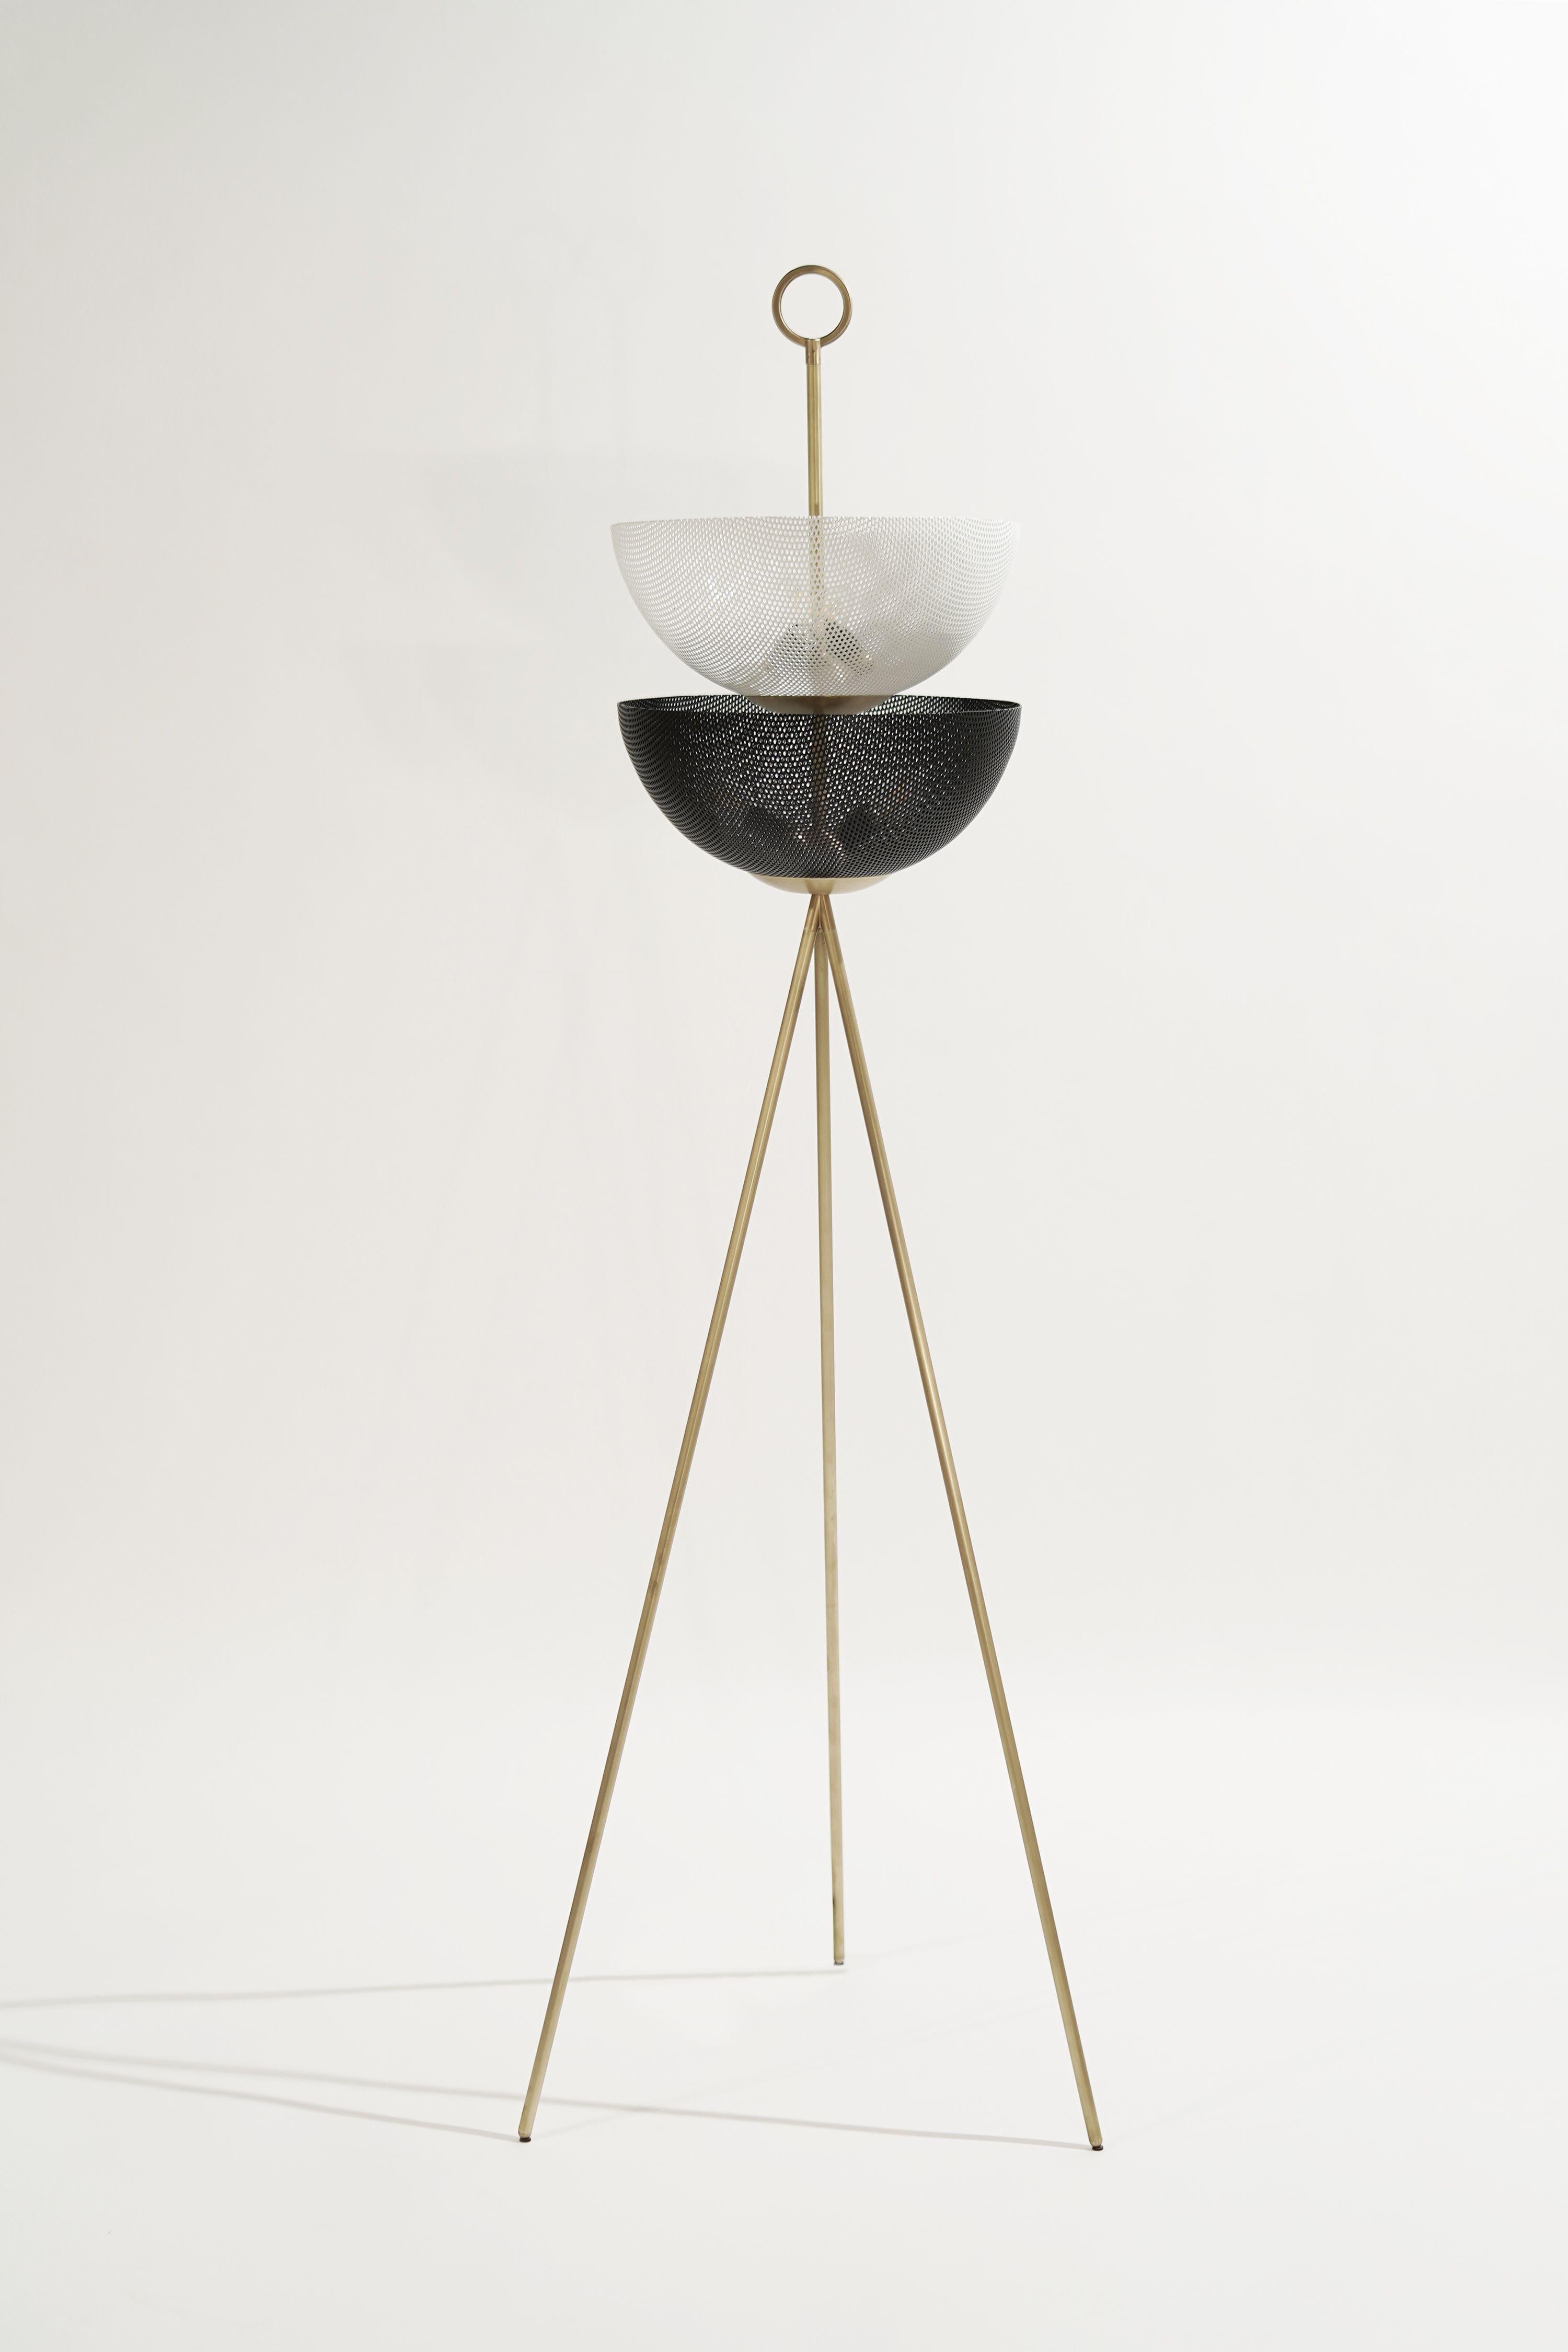 Introducing the Bonbon Floor Lamp--a luminary confection designed by Blueprint Lighting, 2021. Fabricated with spun-metal mesh shades and a tripod brass base. A solid brass Tommi Parzinger-inspired ring finial tops off this gorgeous piece of eye